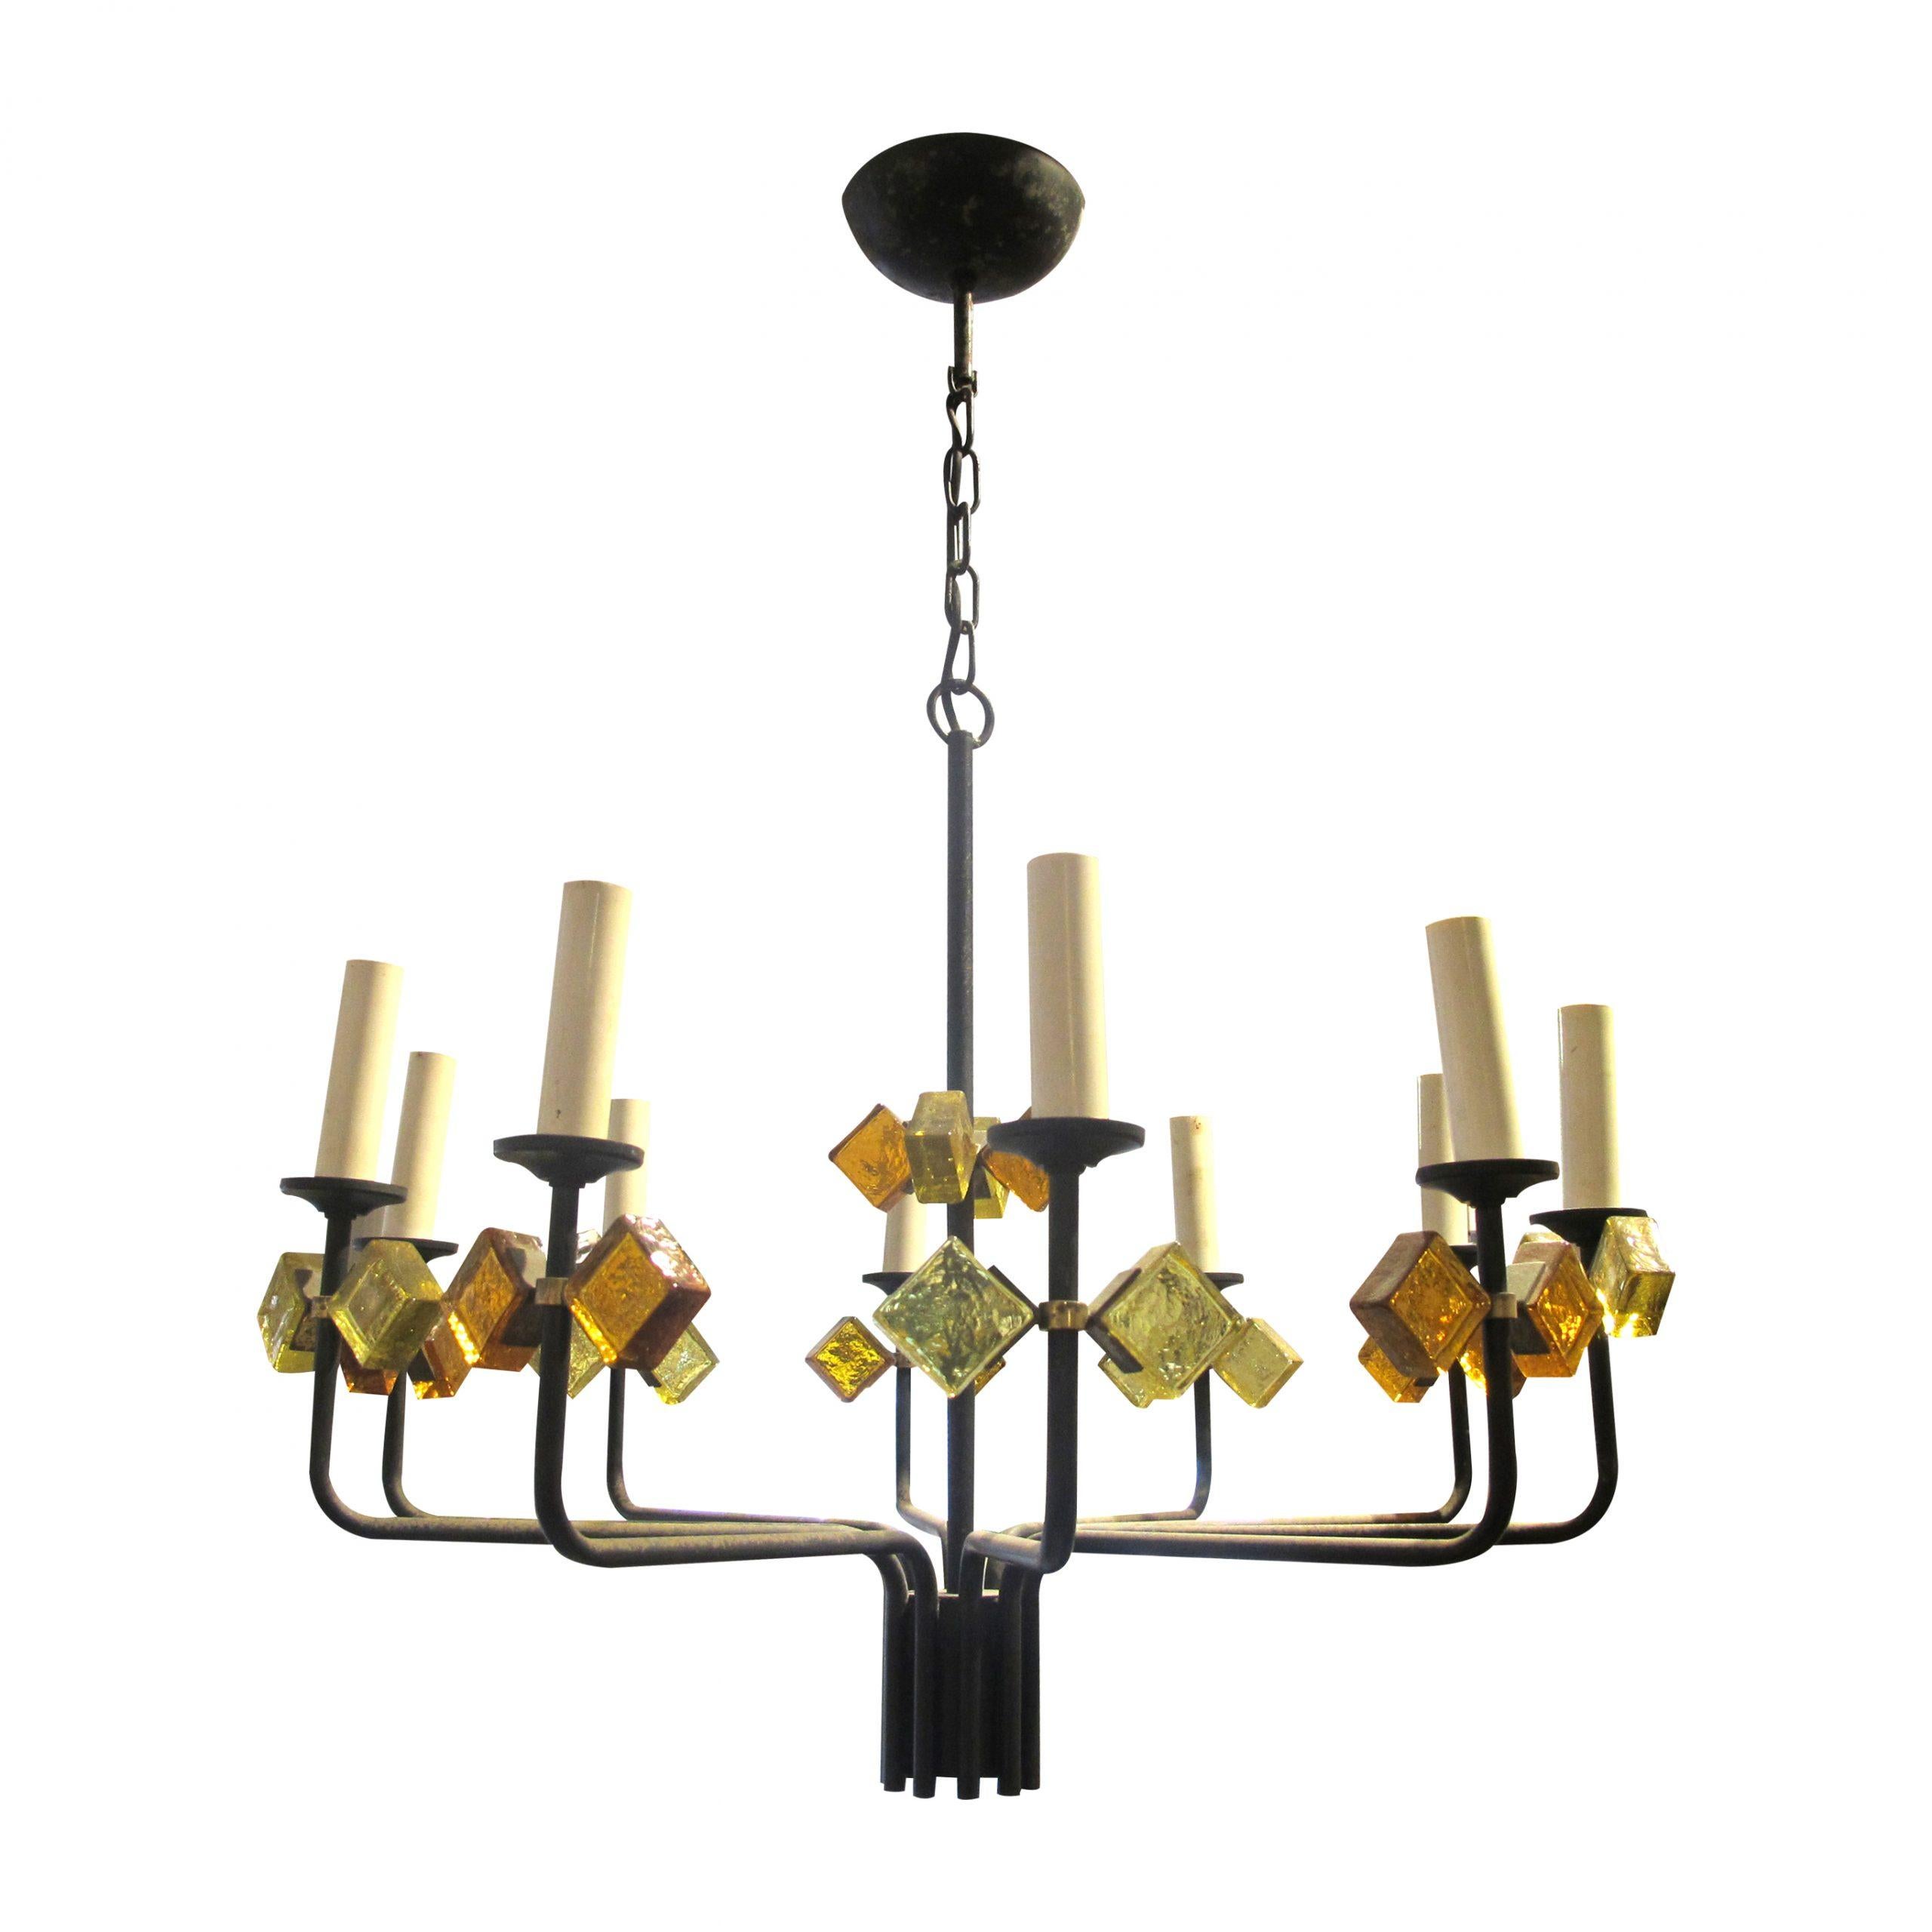 Mid-Century Modern 1950s Danish Pair of Iron and Coloured Glass Chandelier By Svend Aage Holm Soren For Sale